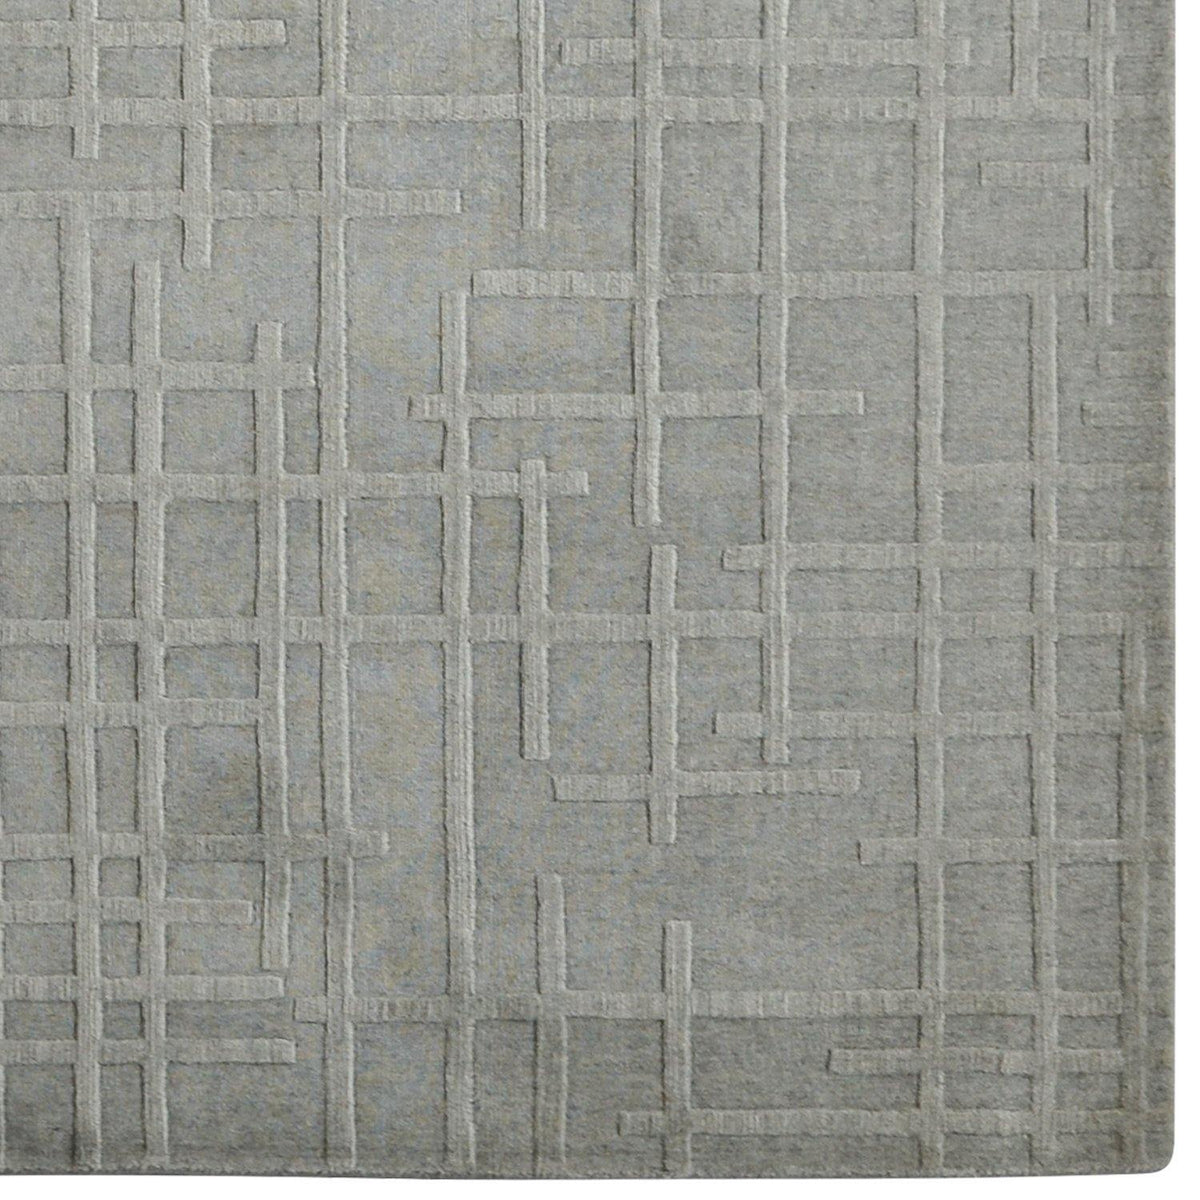 Fine Contemporary Hand-knotted Wool Rug 150cm x 242cm